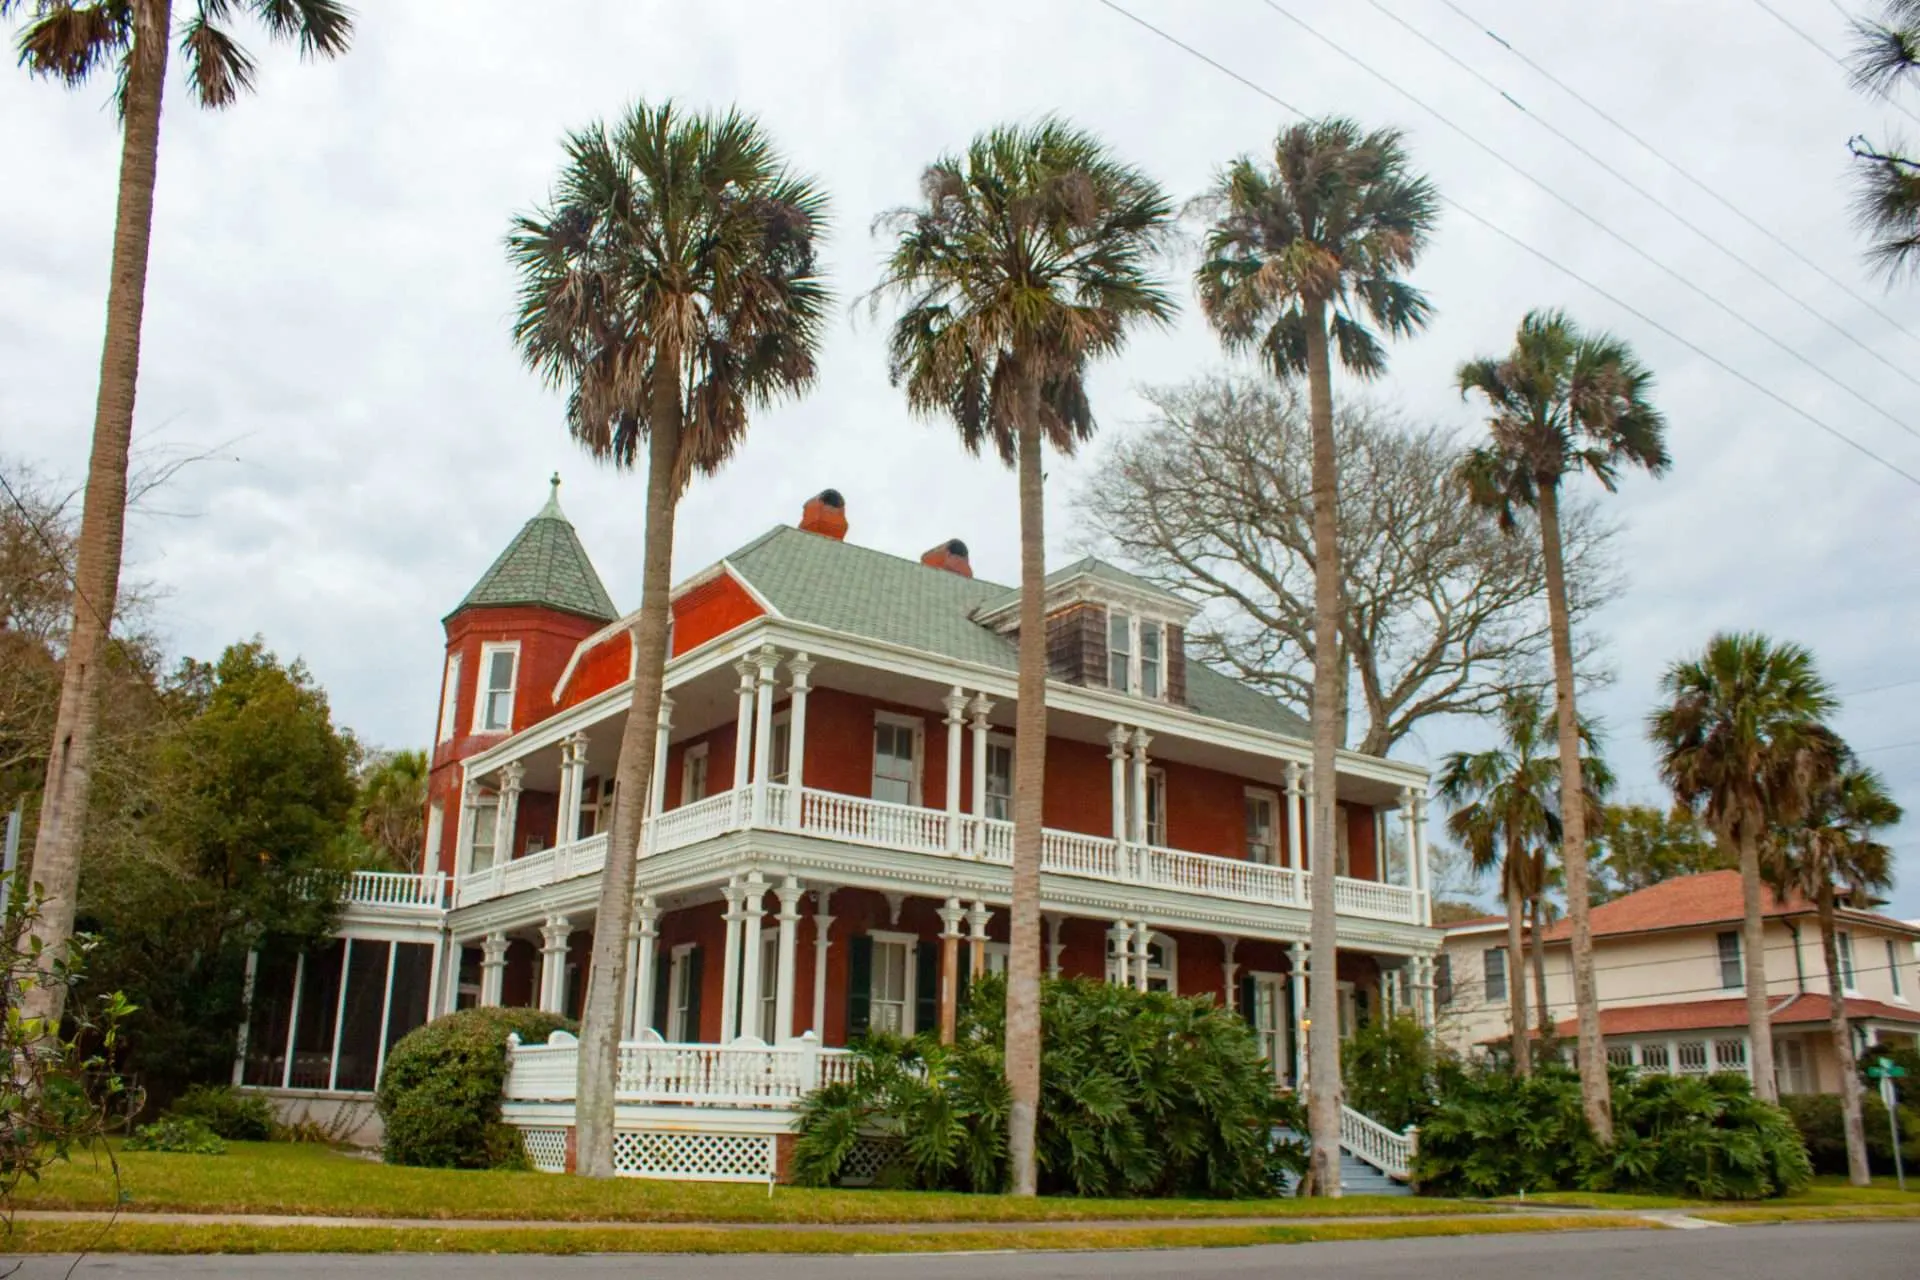 Old home in St. Augustine, Florida.